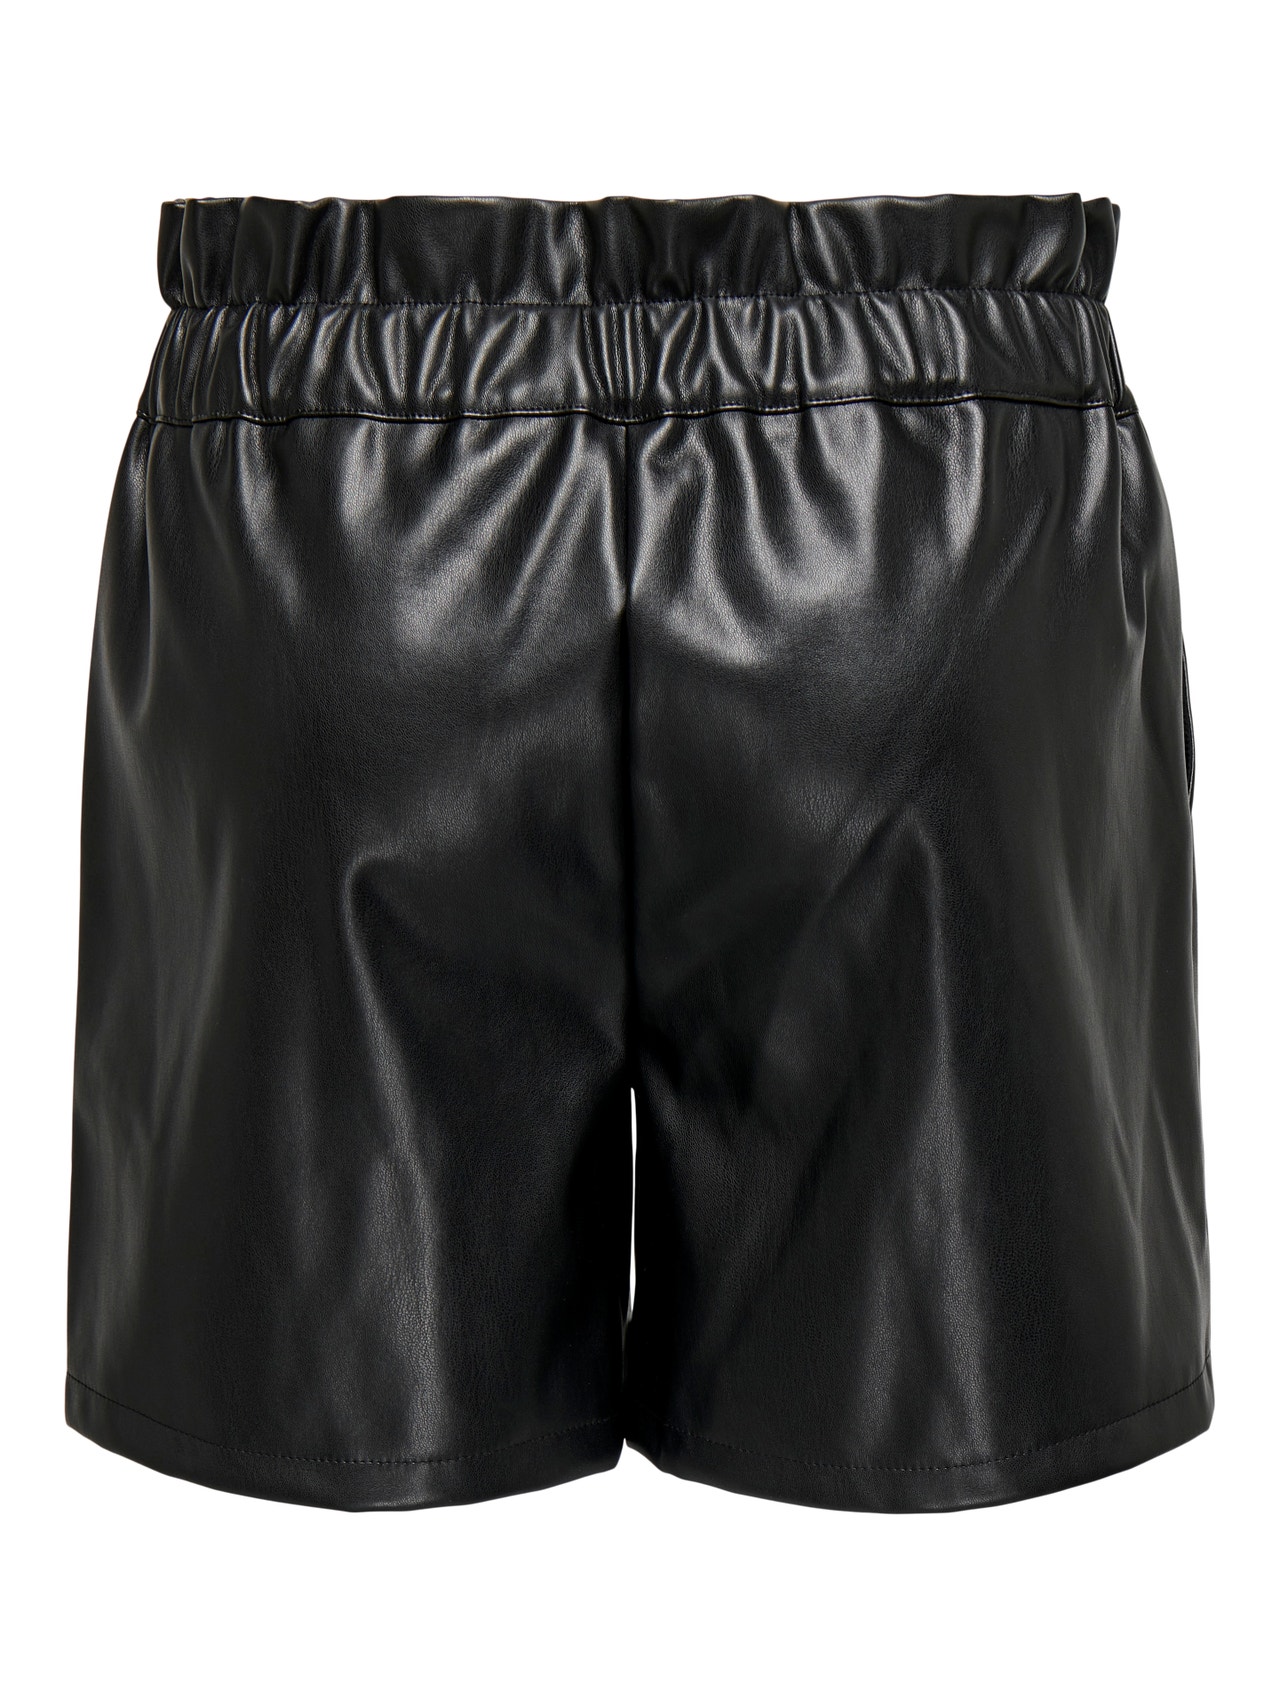 ONLY Faux leather Shorts -Black - 15289126